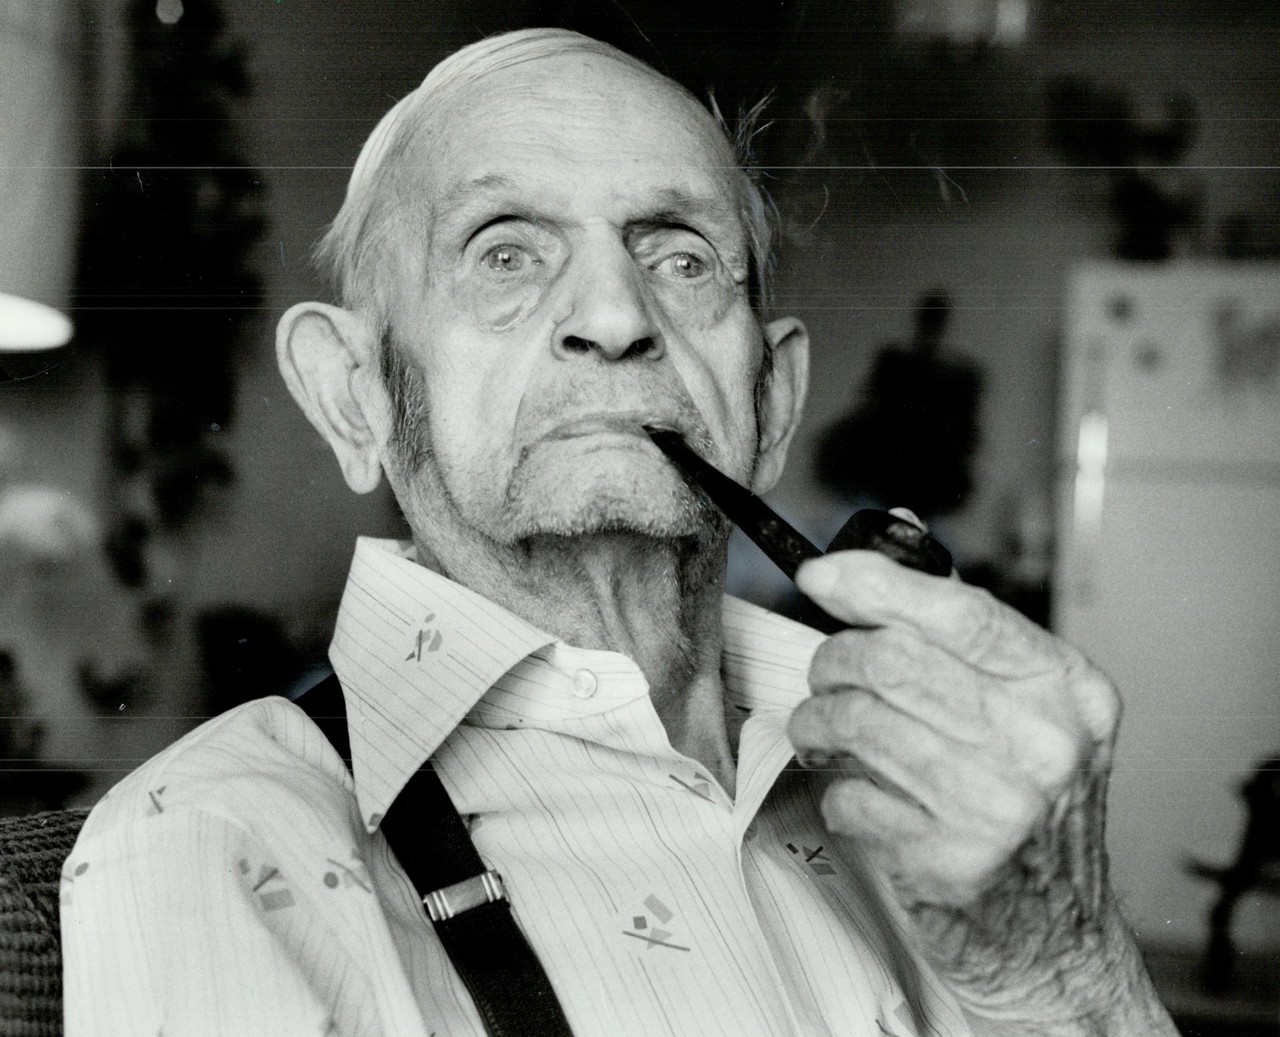 100 year-old-man's hobby is smoking his pipe